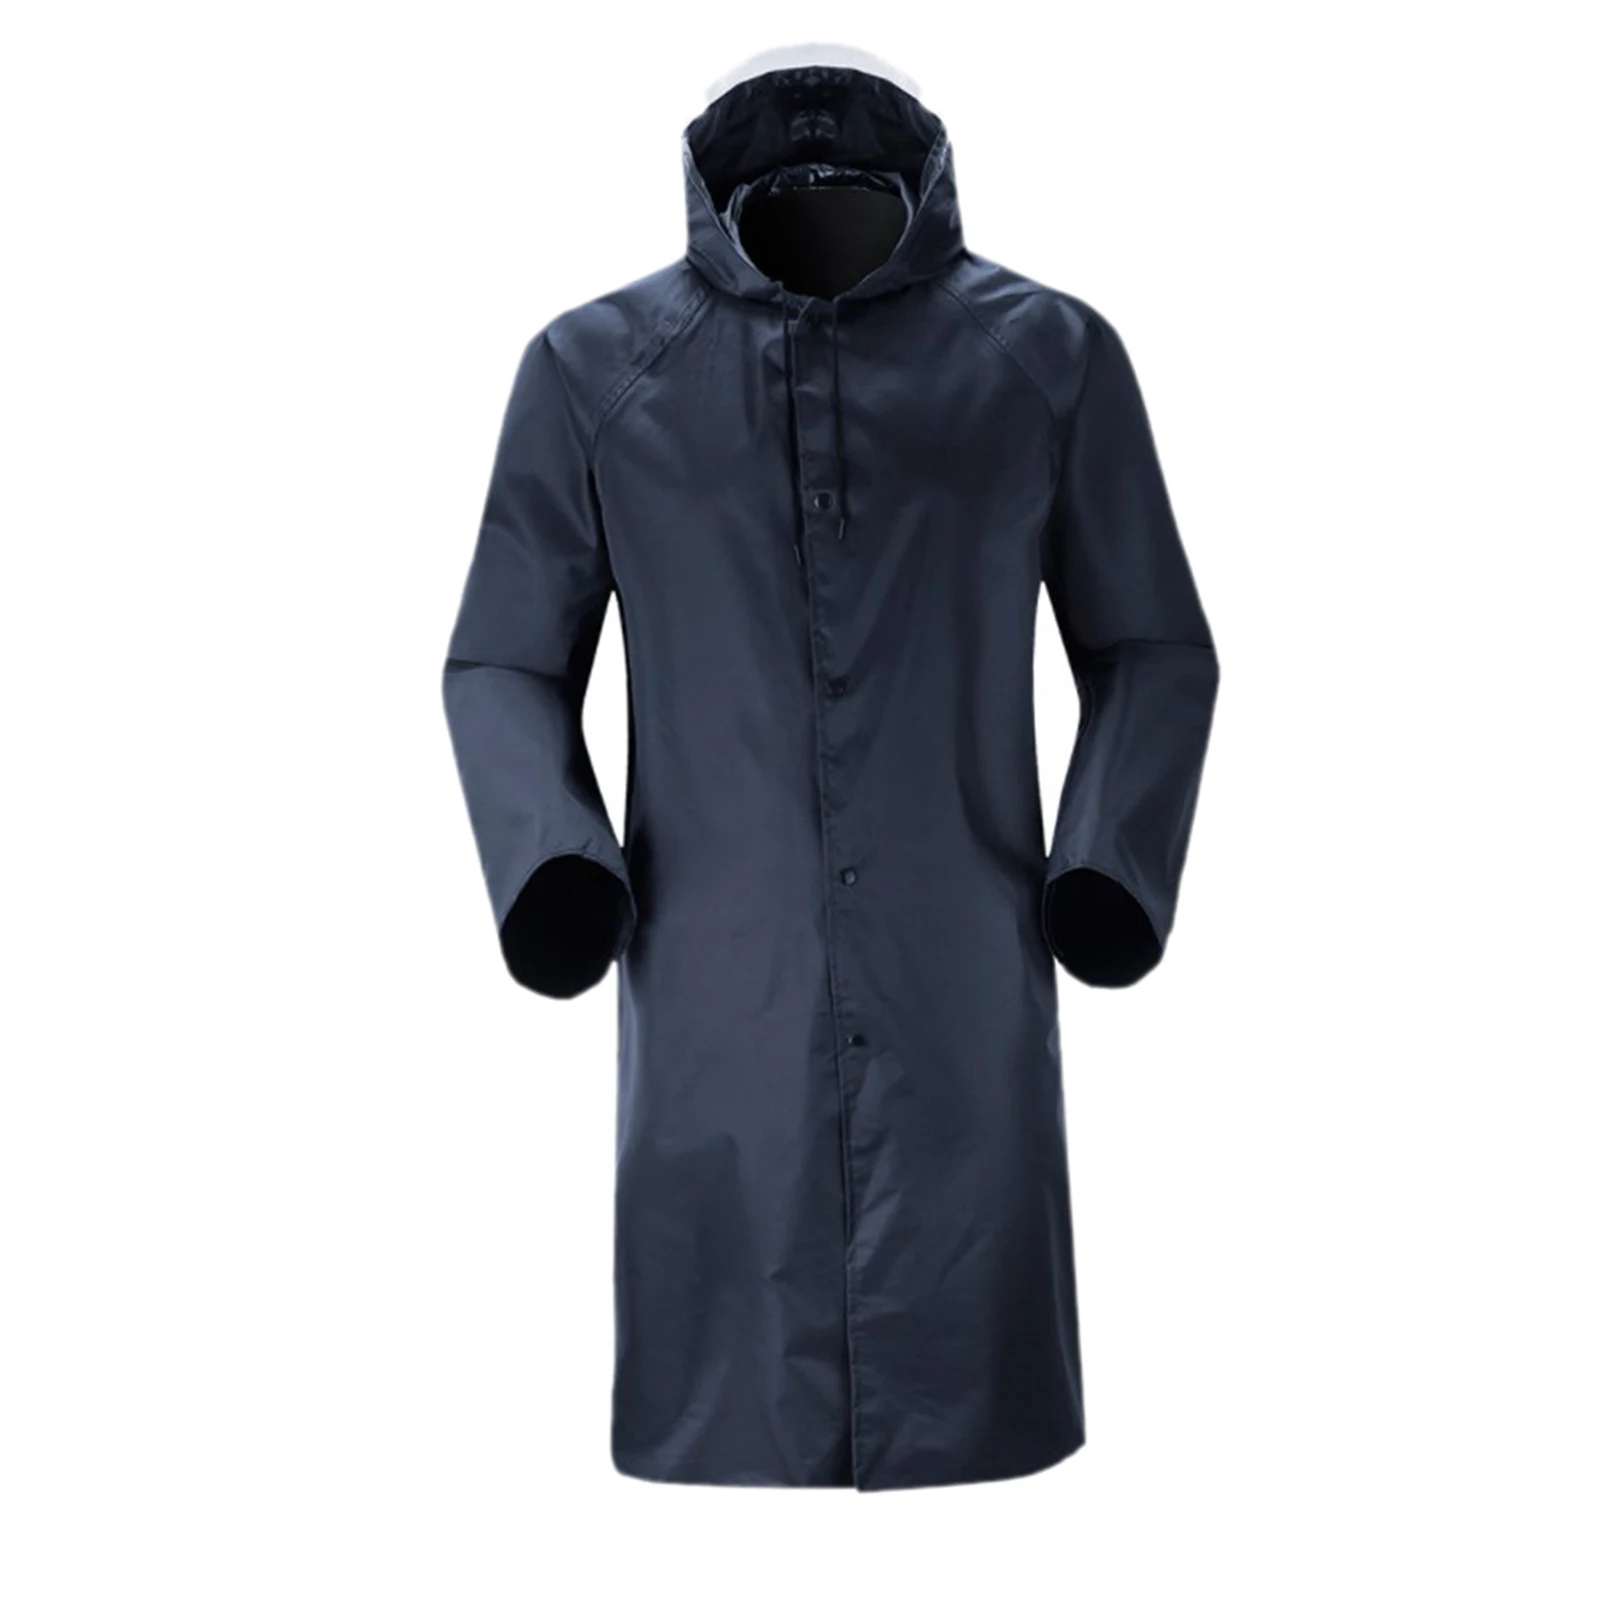 Men`s Rain Jacket Poncho Hooded Raincoat with   for Hiking Travel Outdoor